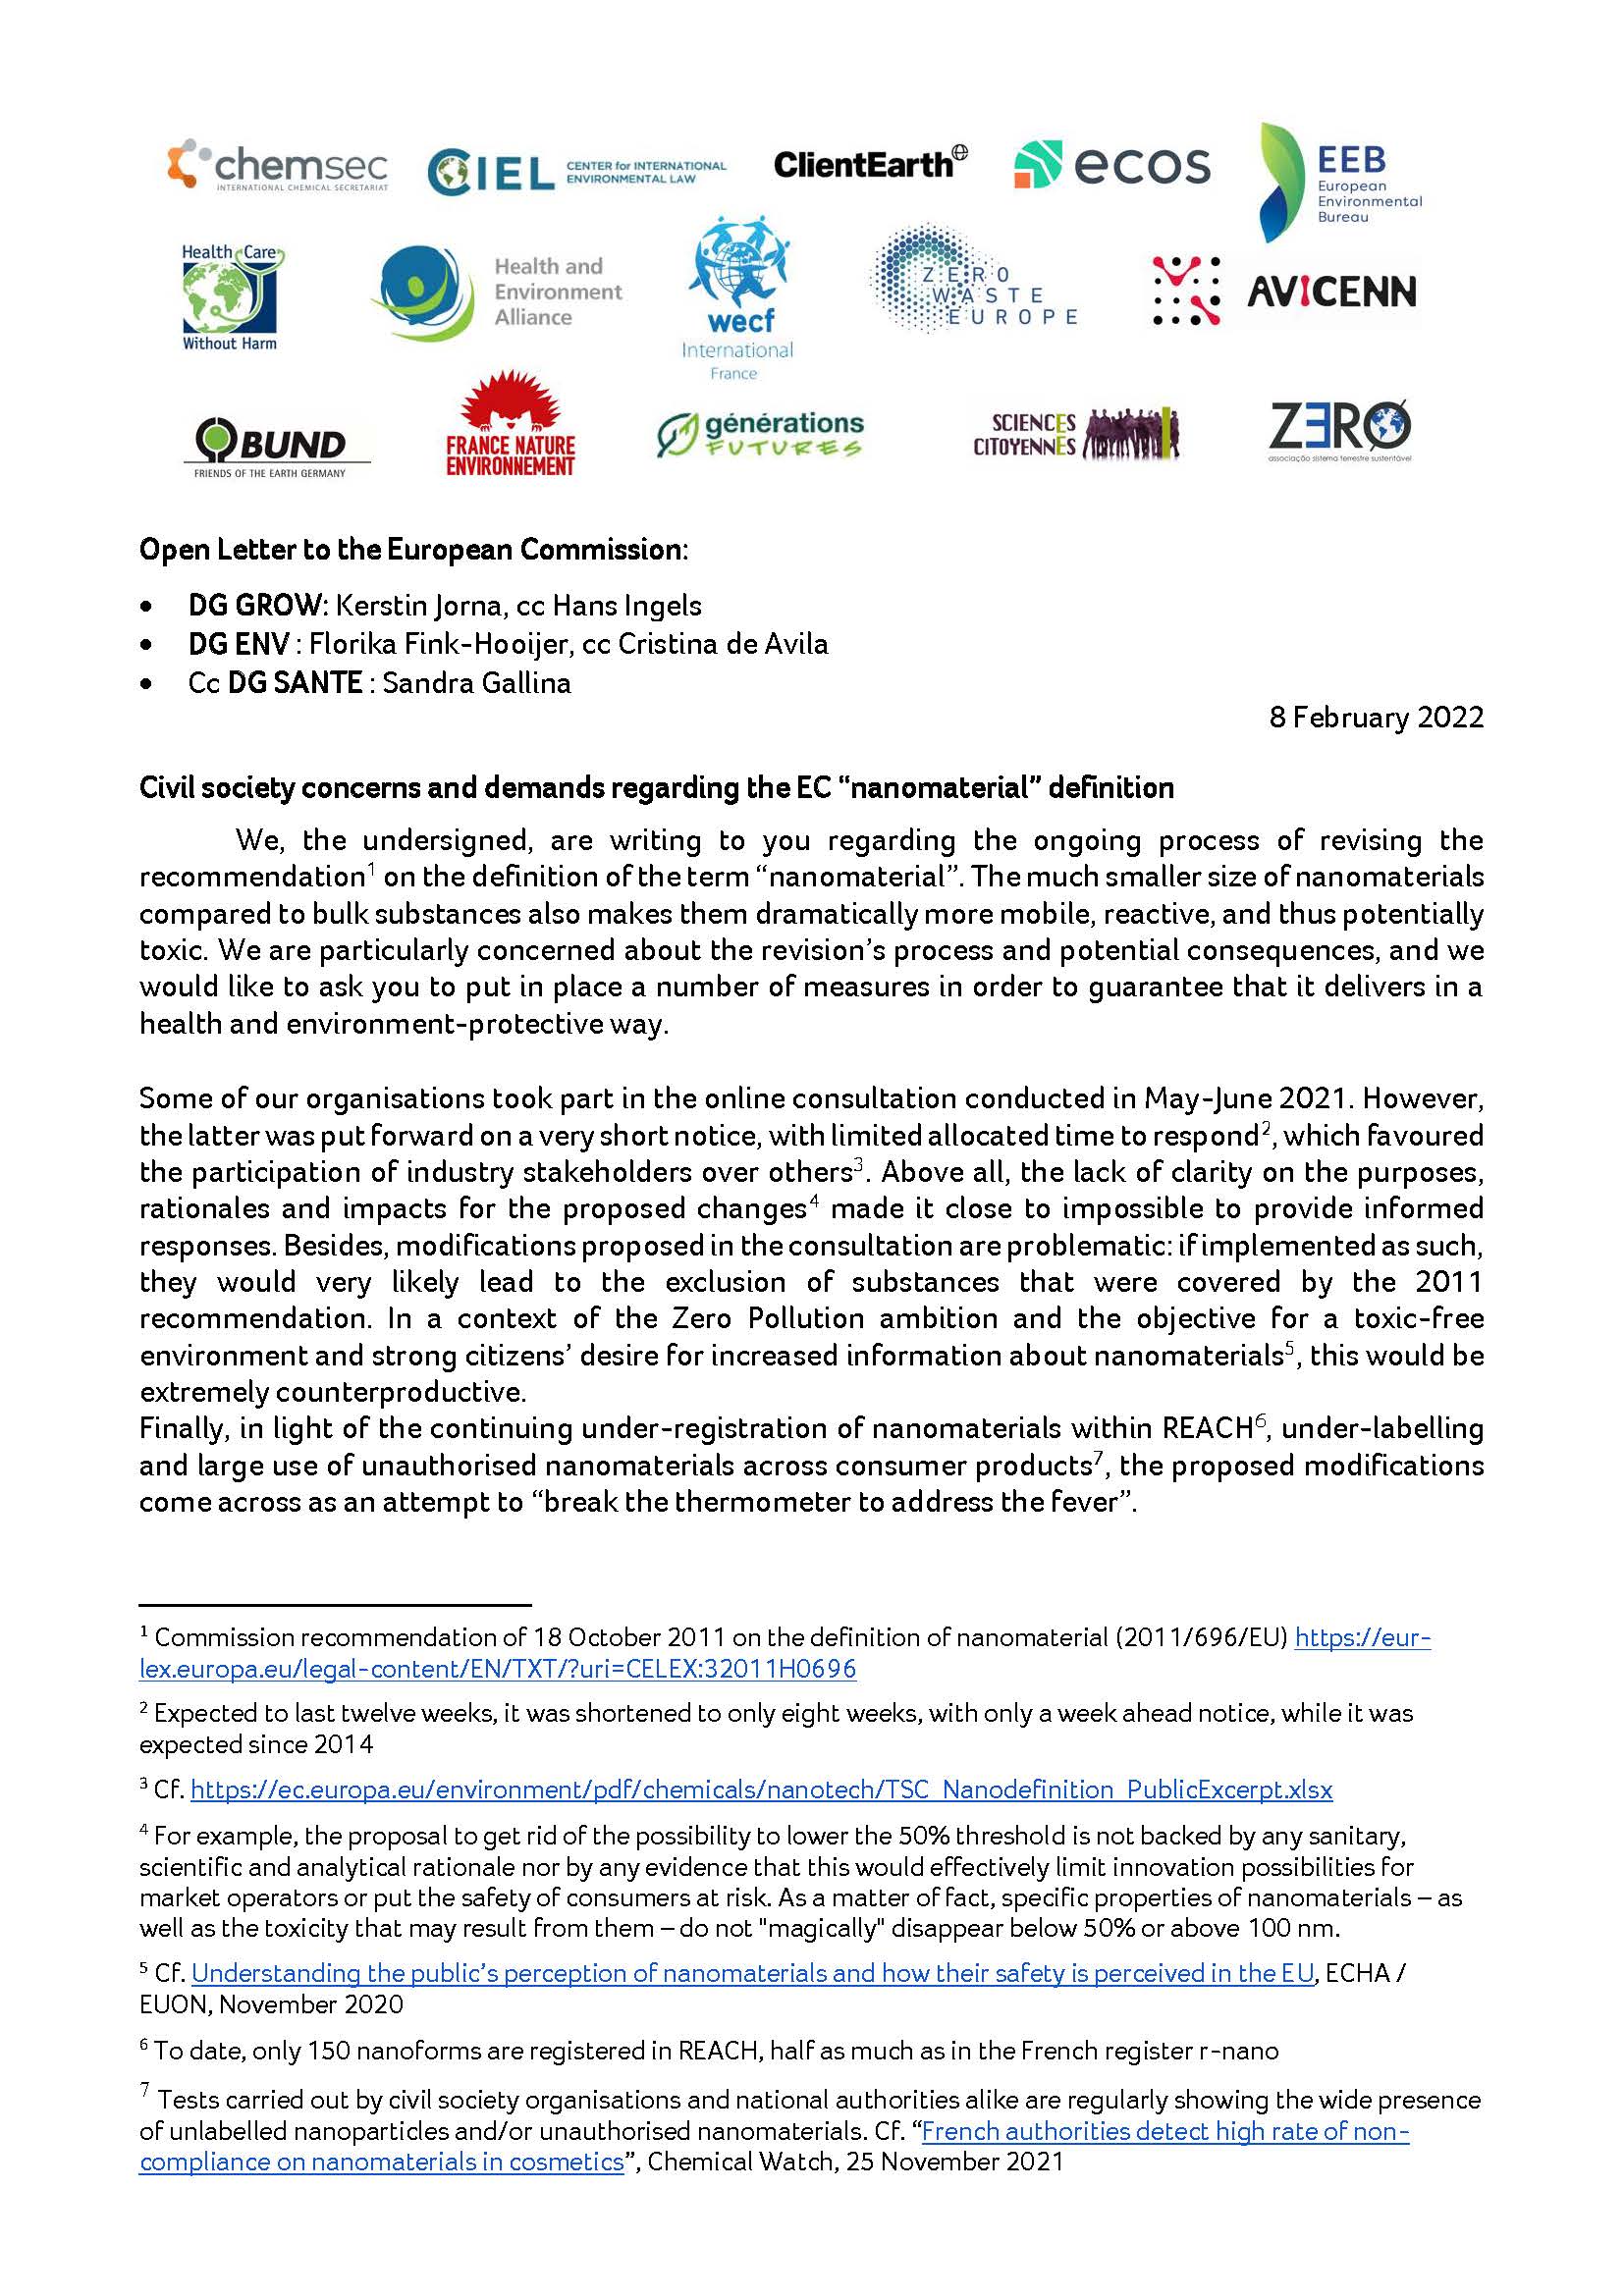 Open Letter – Civil society concerns and demands regarding the EC “nanomaterial” definition